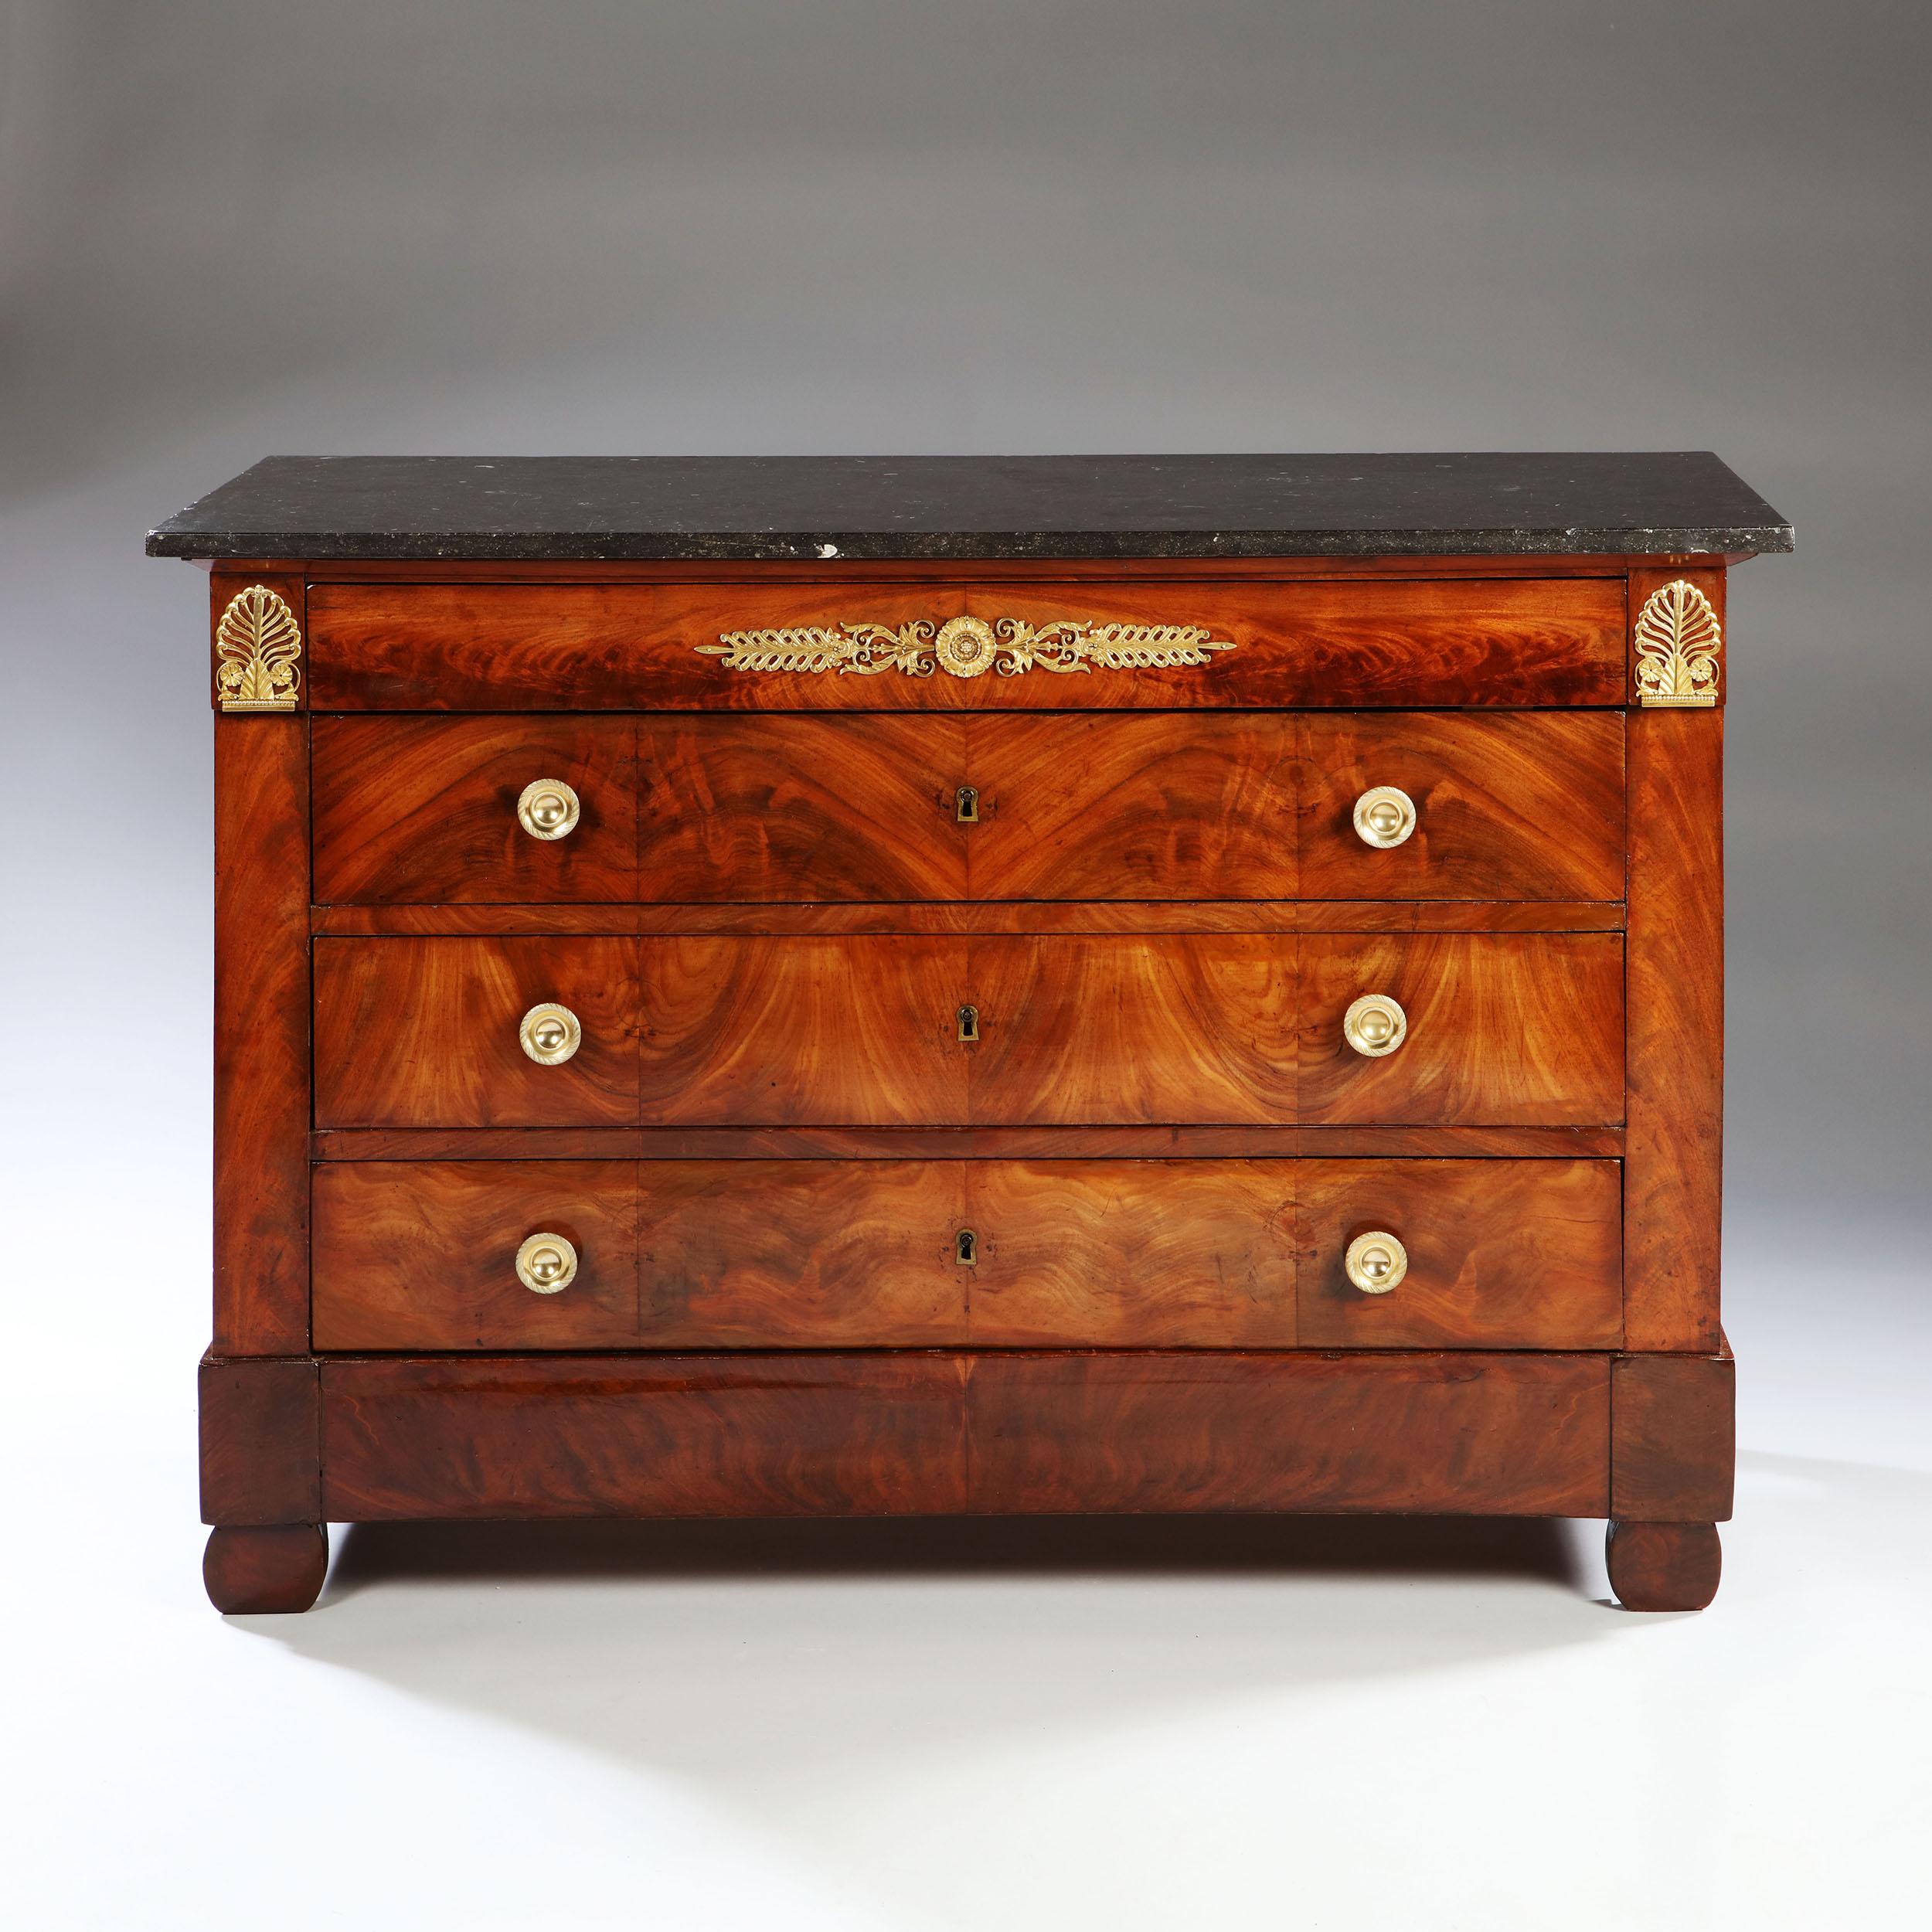 France, c. 1820

An early 19th century Empire mahogany commode with finely chased ormolu mounts, retaining the original marble top.

Height  88.50cm
Width   130.00cm
Depth   57.00cm